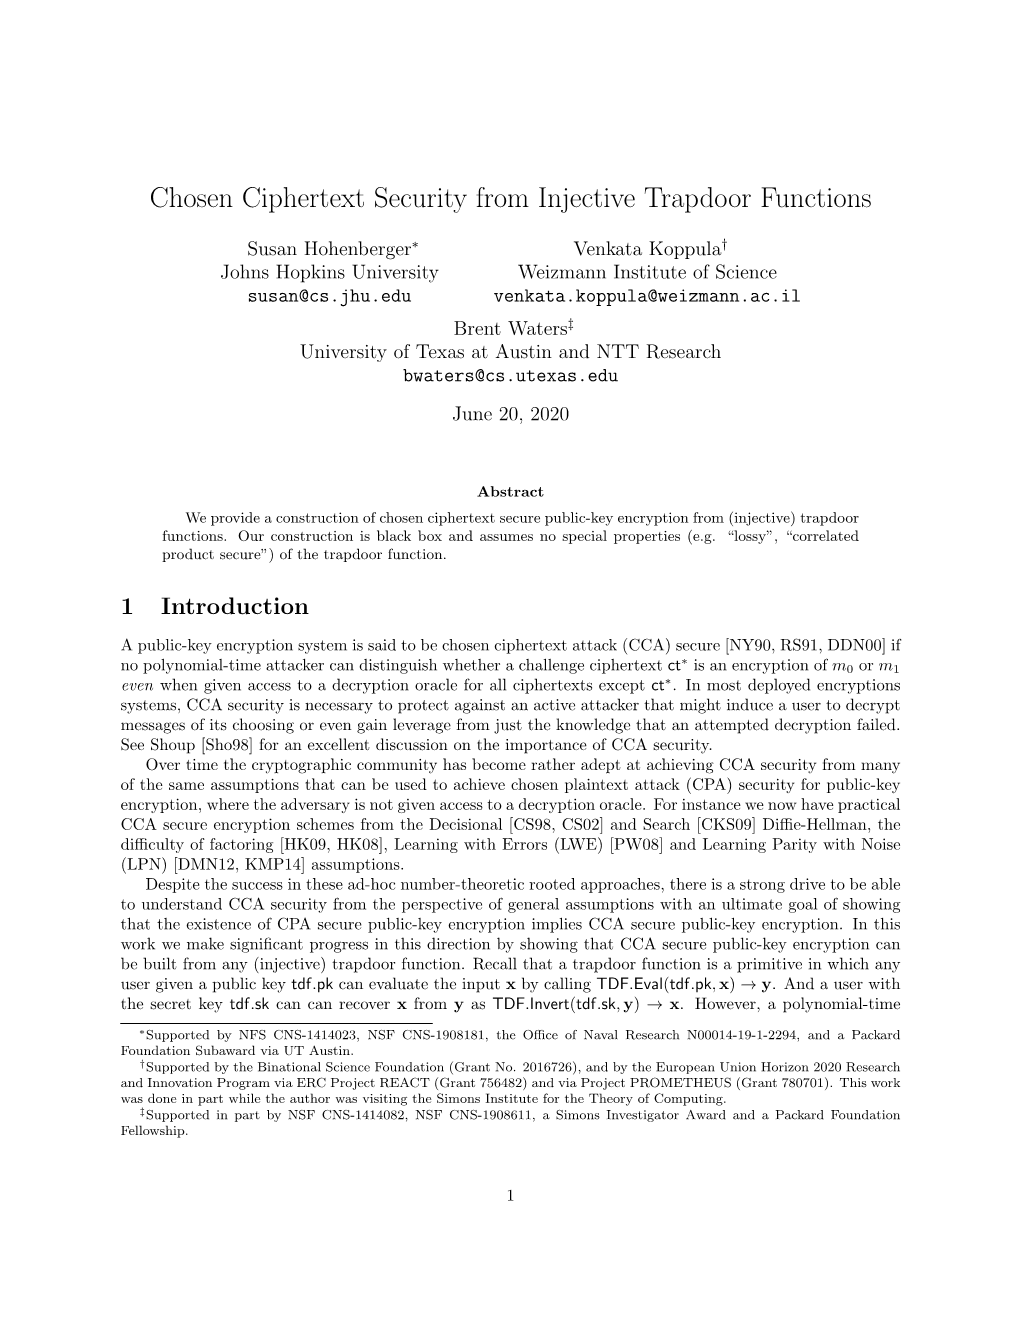 Chosen Ciphertext Security from Injective Trapdoor Functions